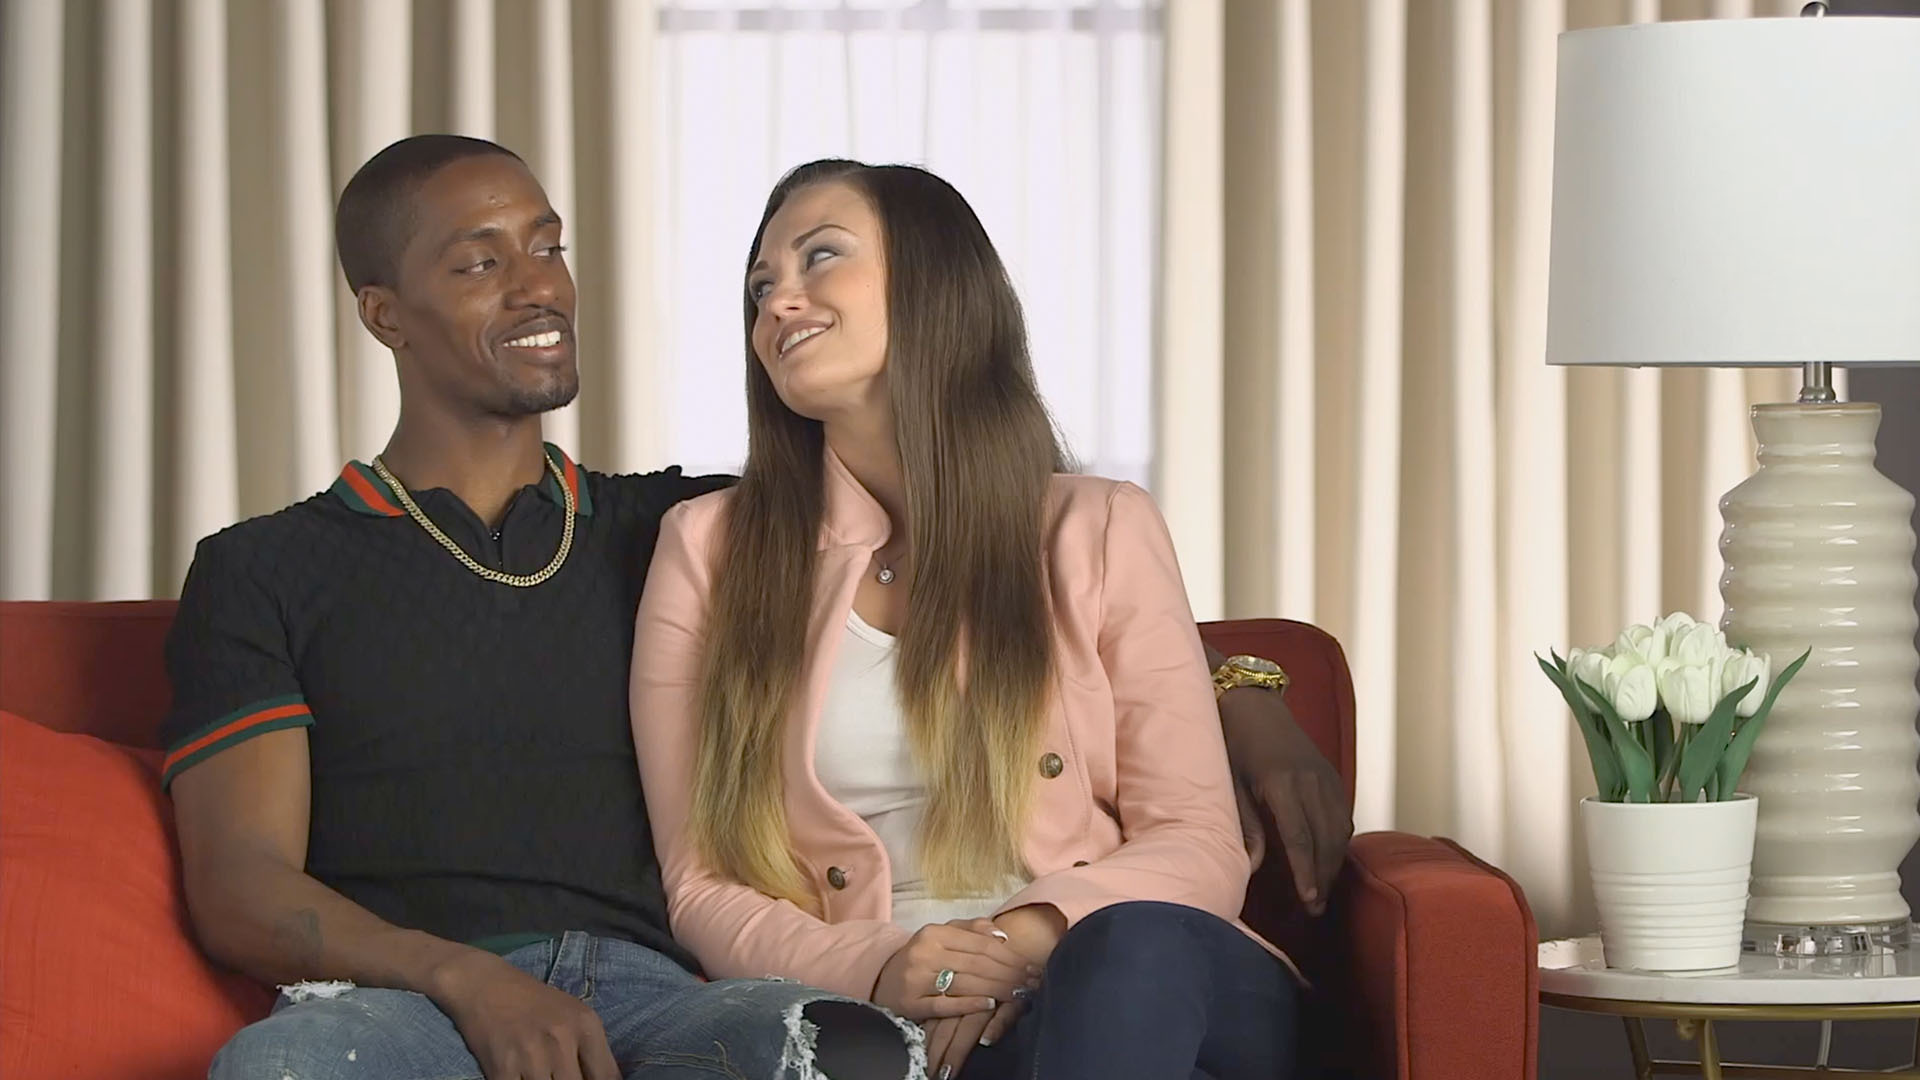 Watch Daonte & Lindsey Have Found New Love! | Life After Lockup Video Extras